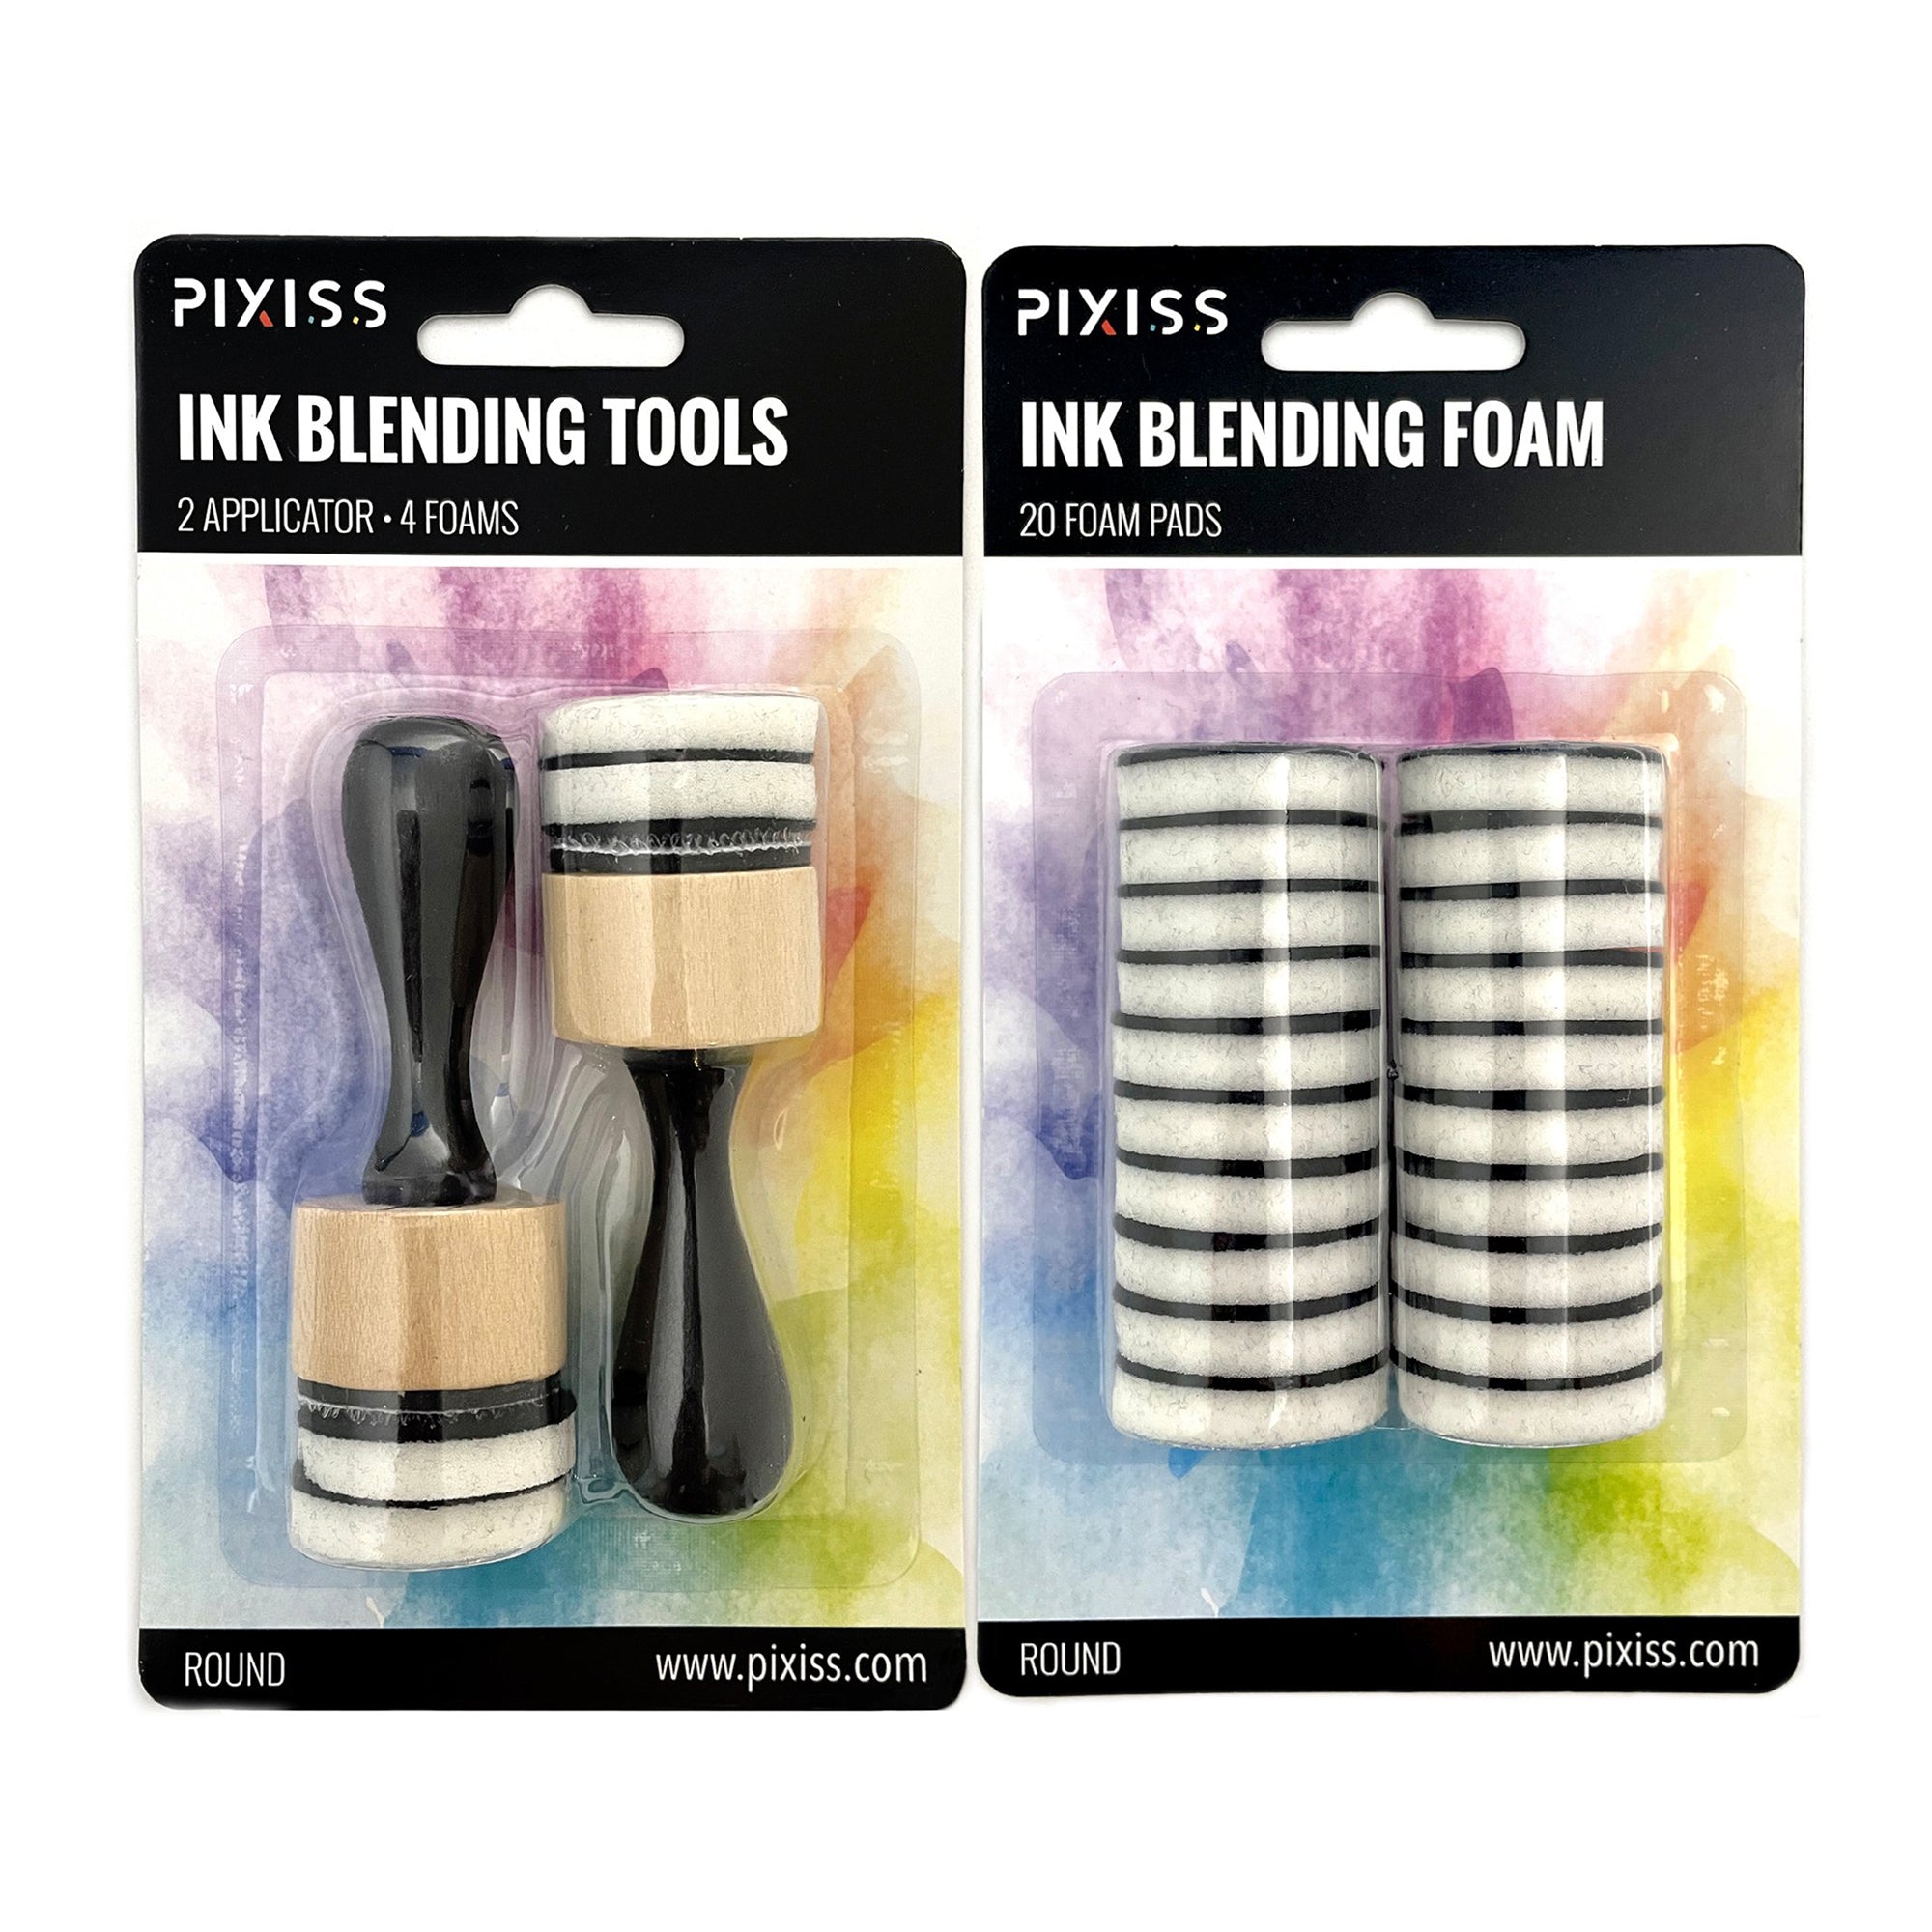 Pixiss Mini Ink Blending Tools, 2 Pack Round with 4 Replacement Foam Pads for Distressing, Blending and More